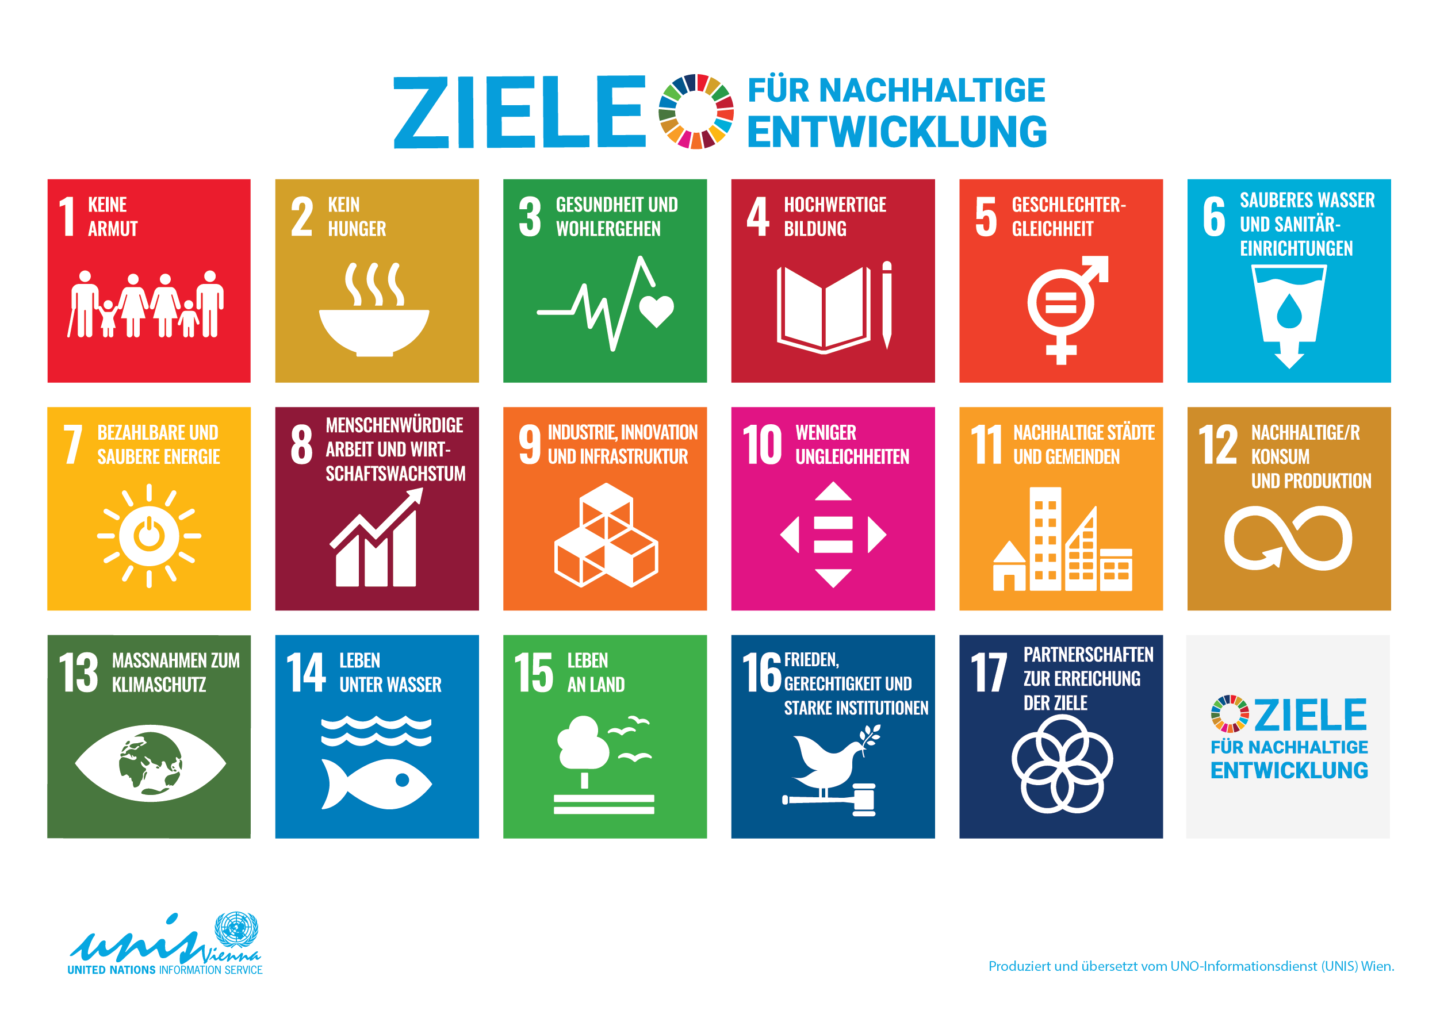 The 17 Sustainable Development Goals - a global mission for a better future